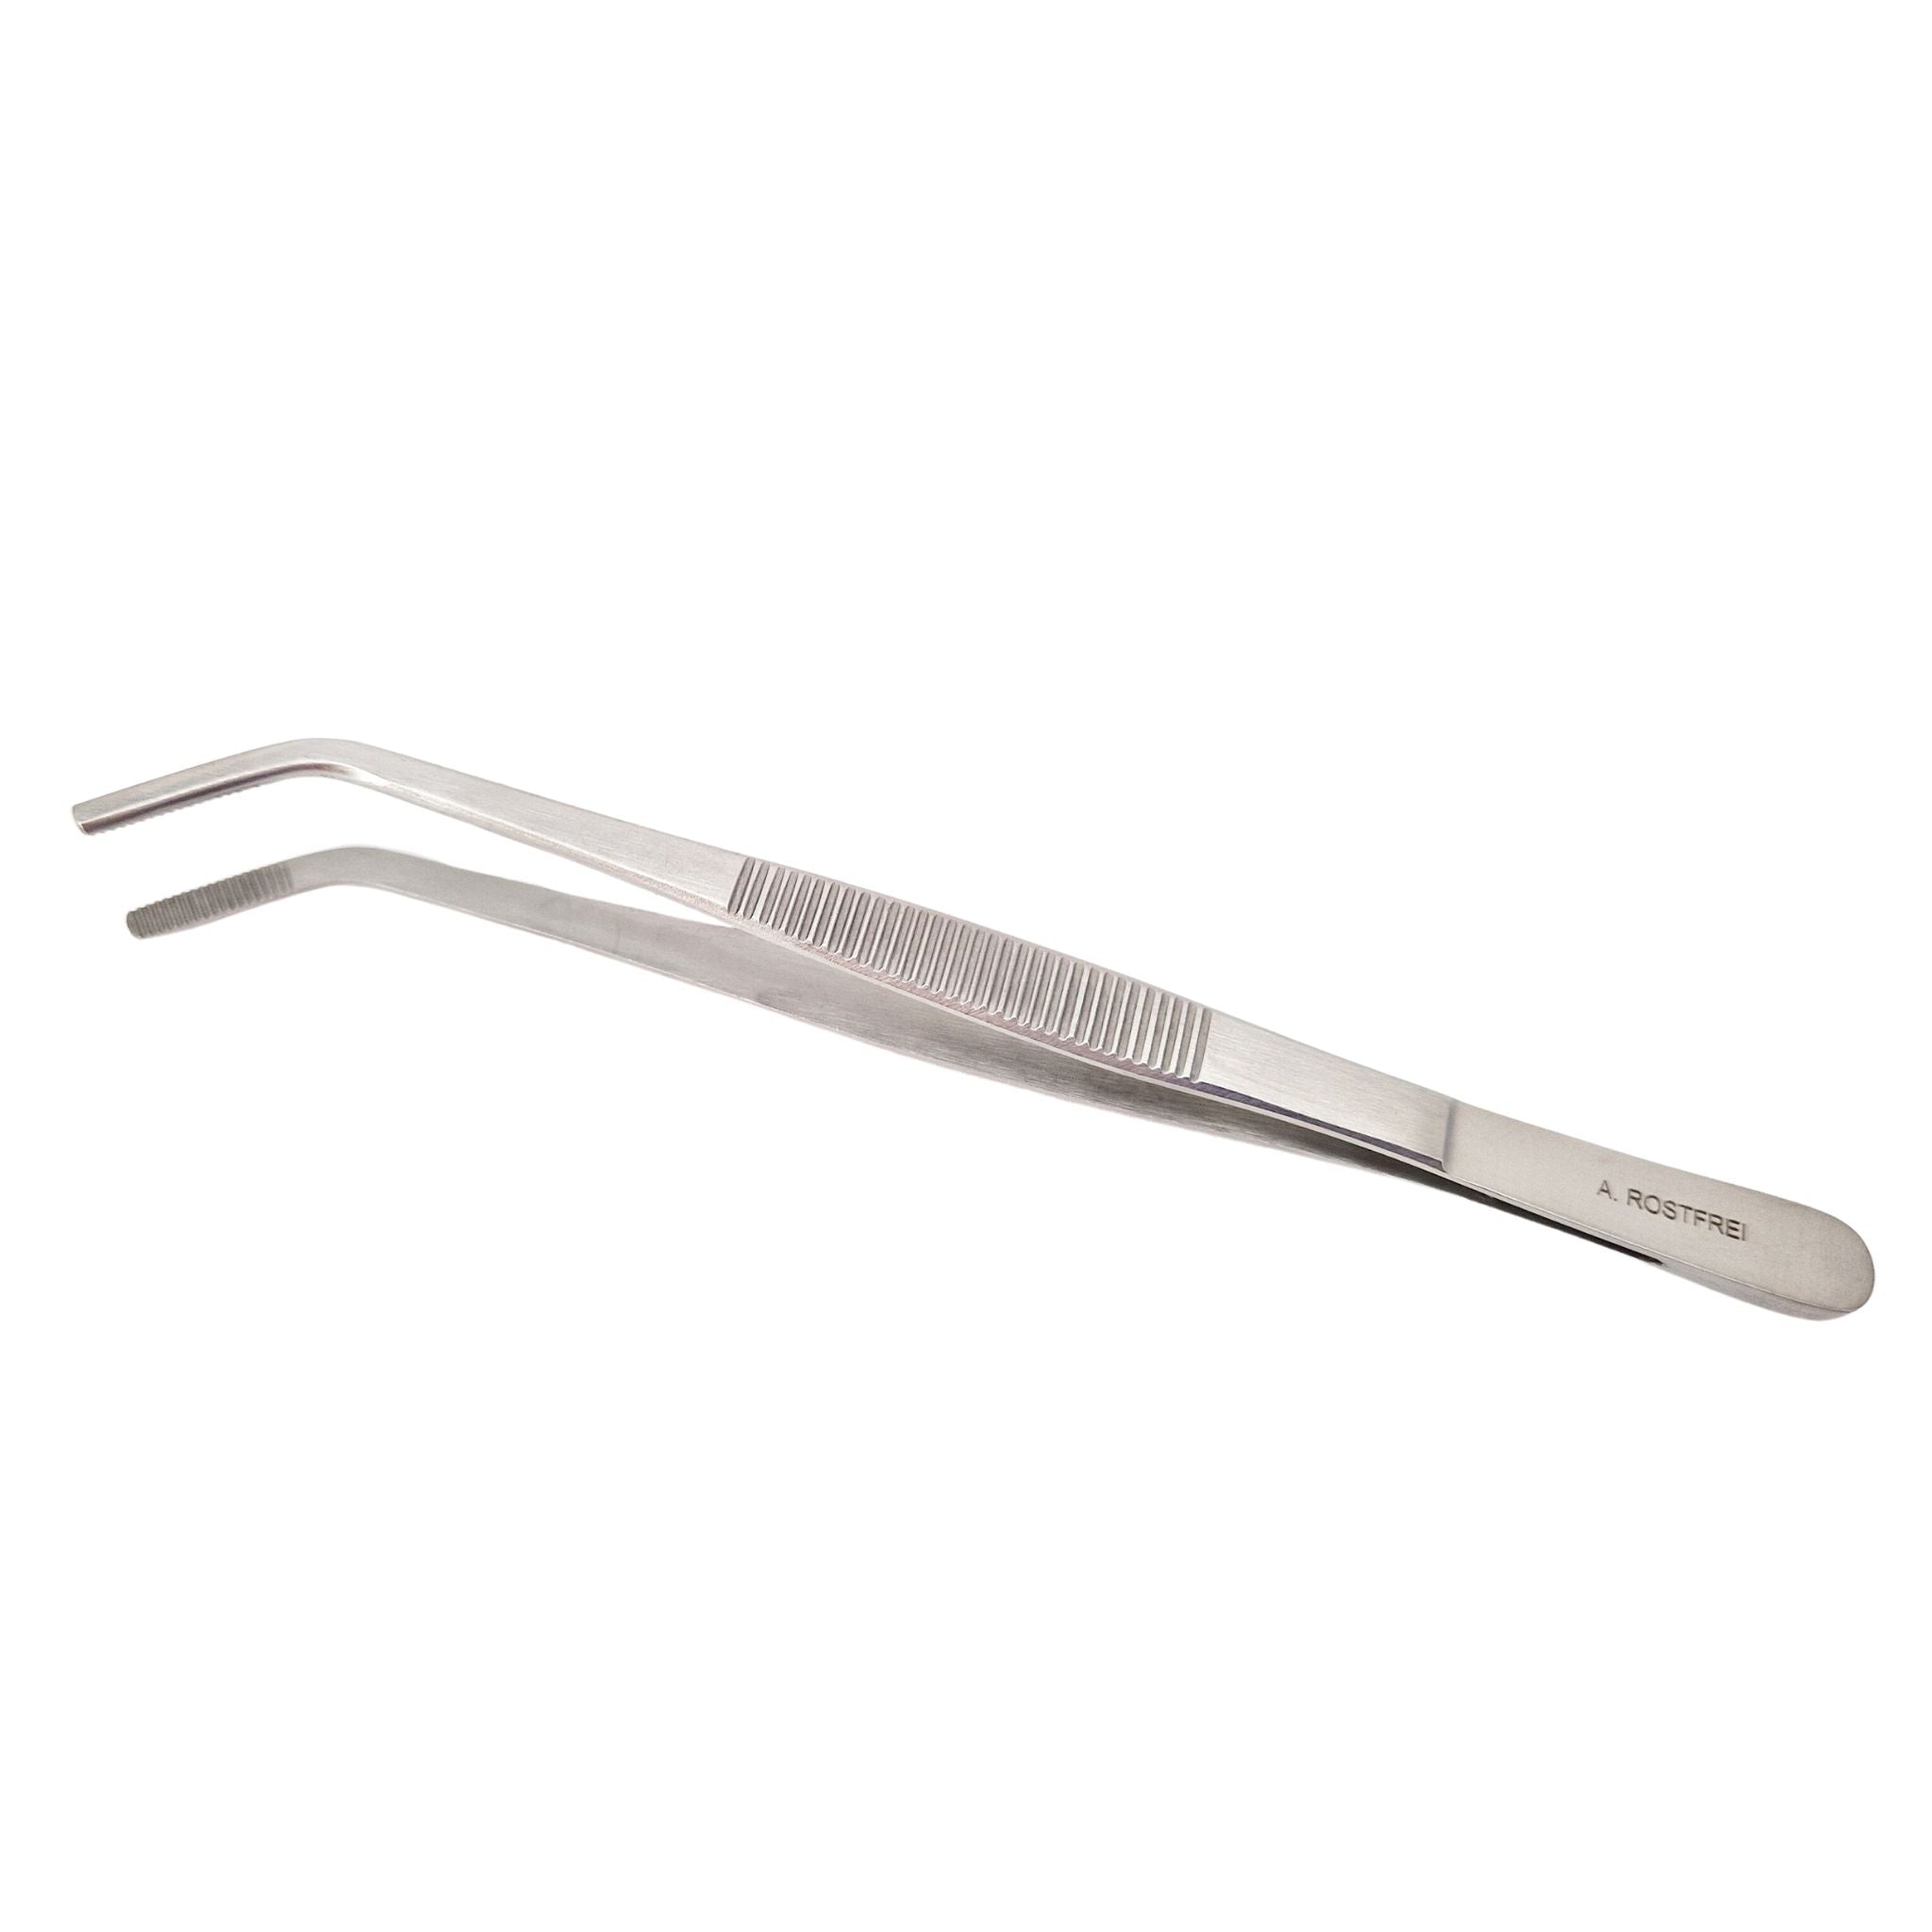 Lavabis dissecting forceps angled stainless steel